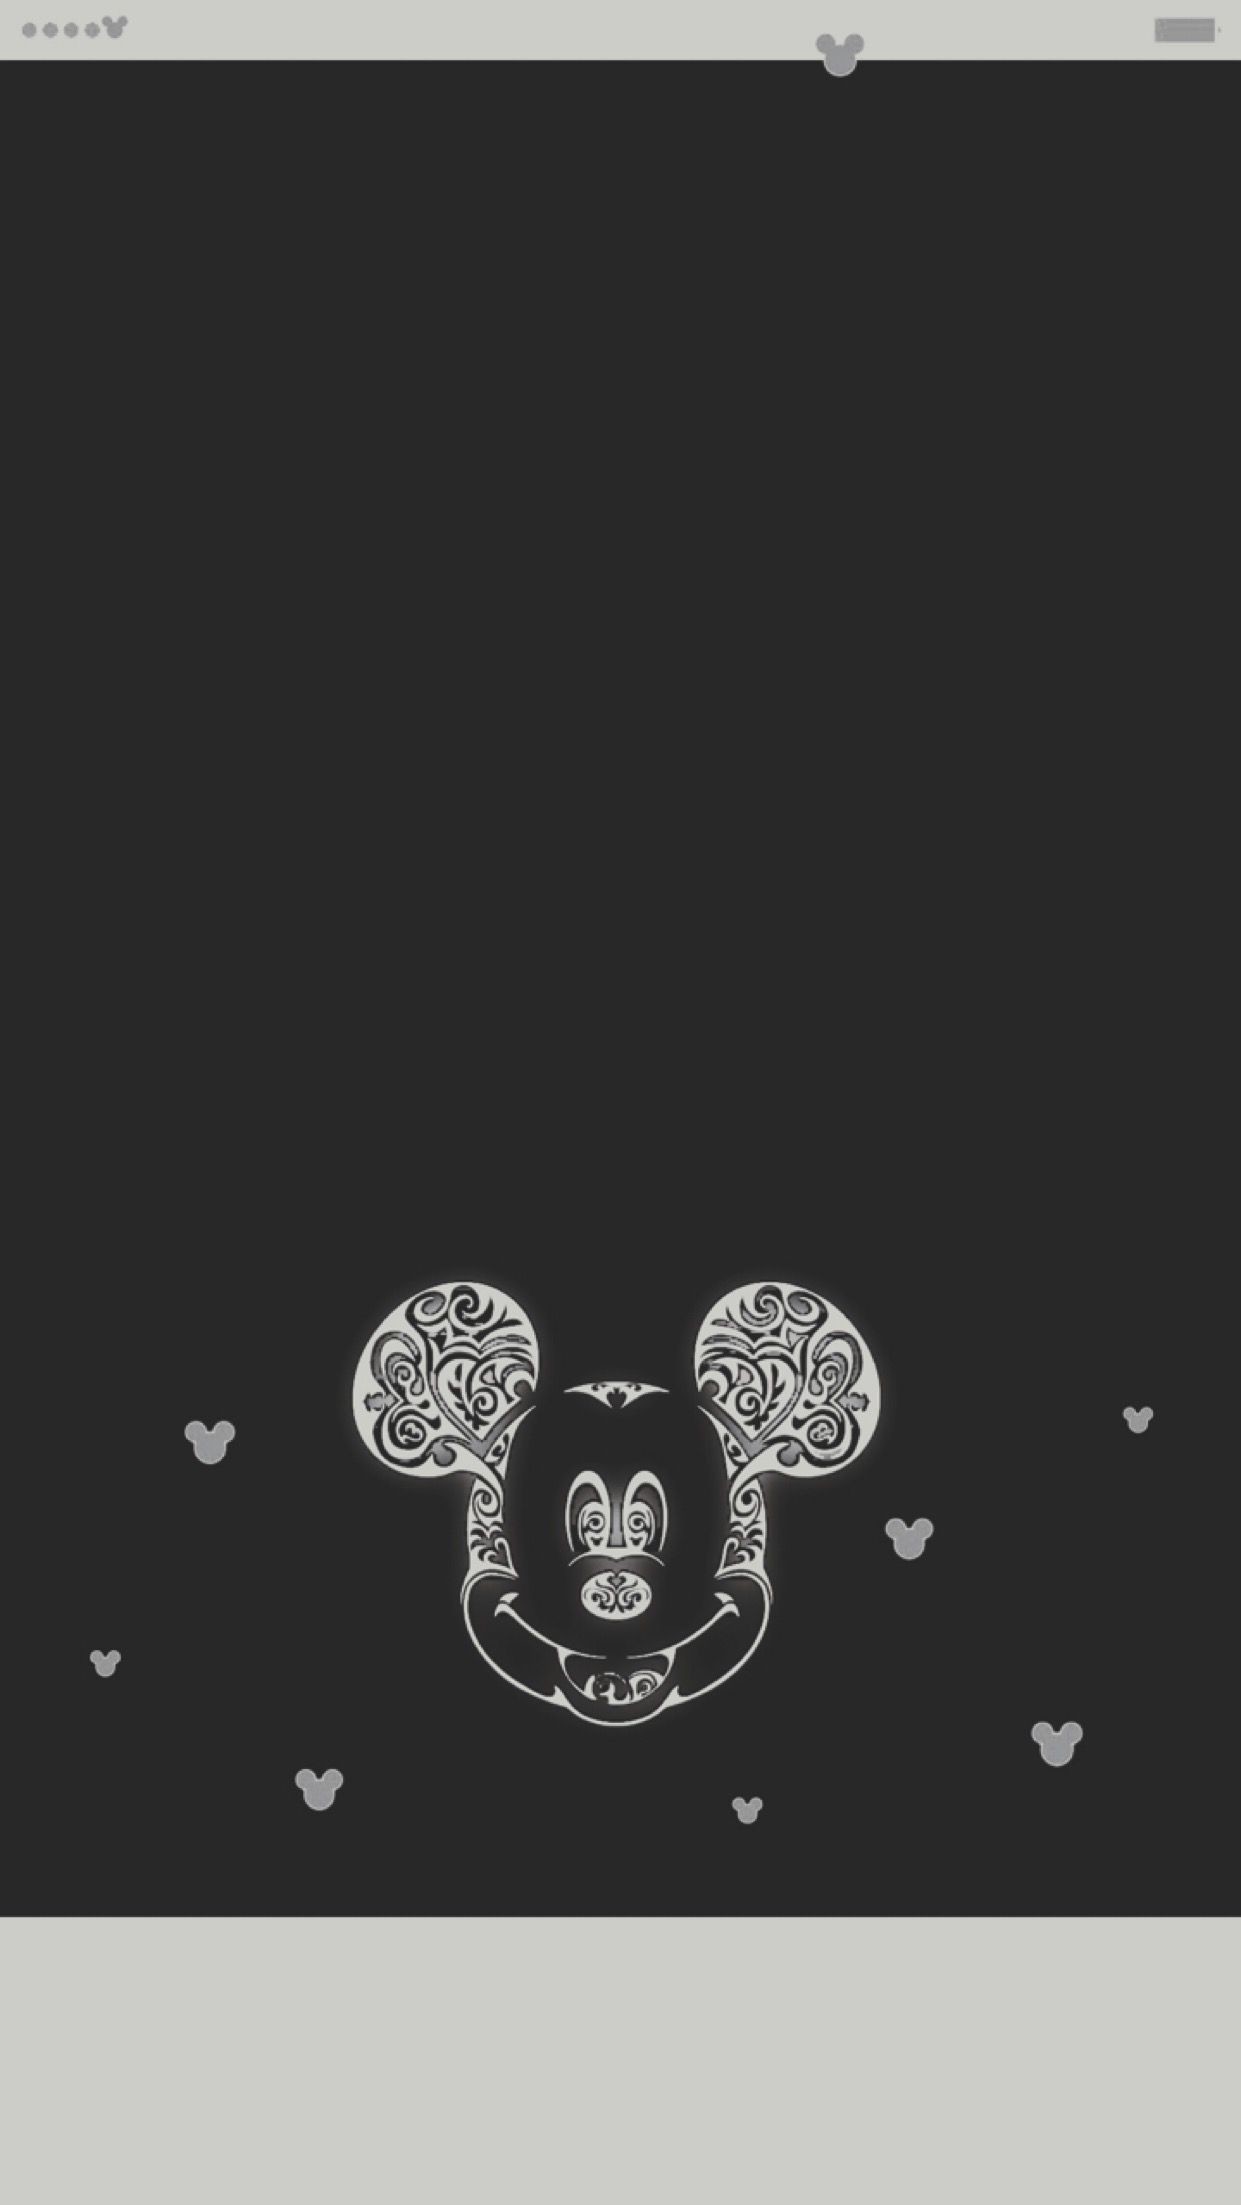 1241x2205 736x1308 Pictures of Mickey Mouse Ears Iphone Wallpaper - kidskunst.info">